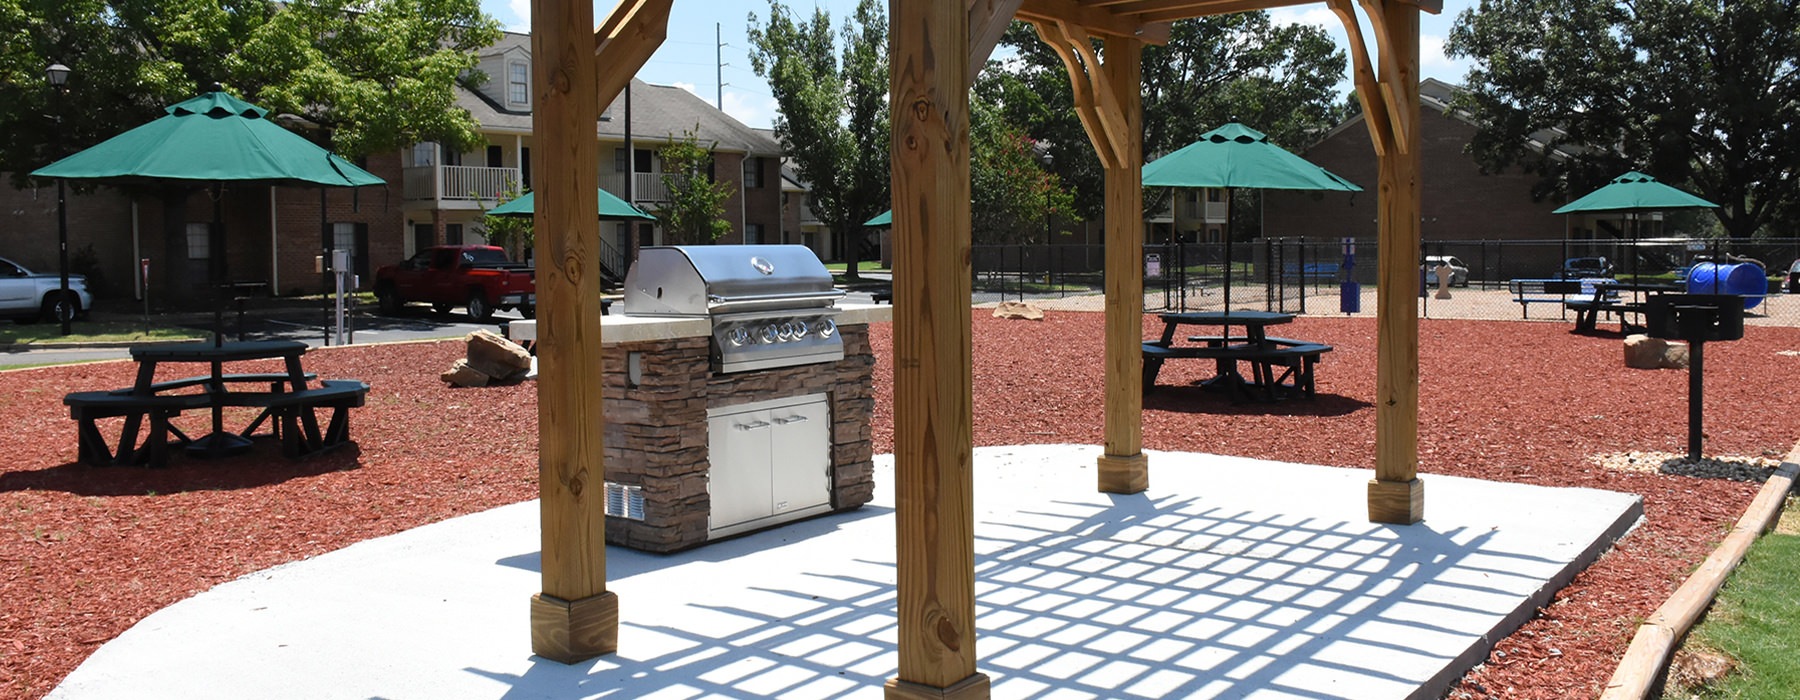 Grill station with picnic tables